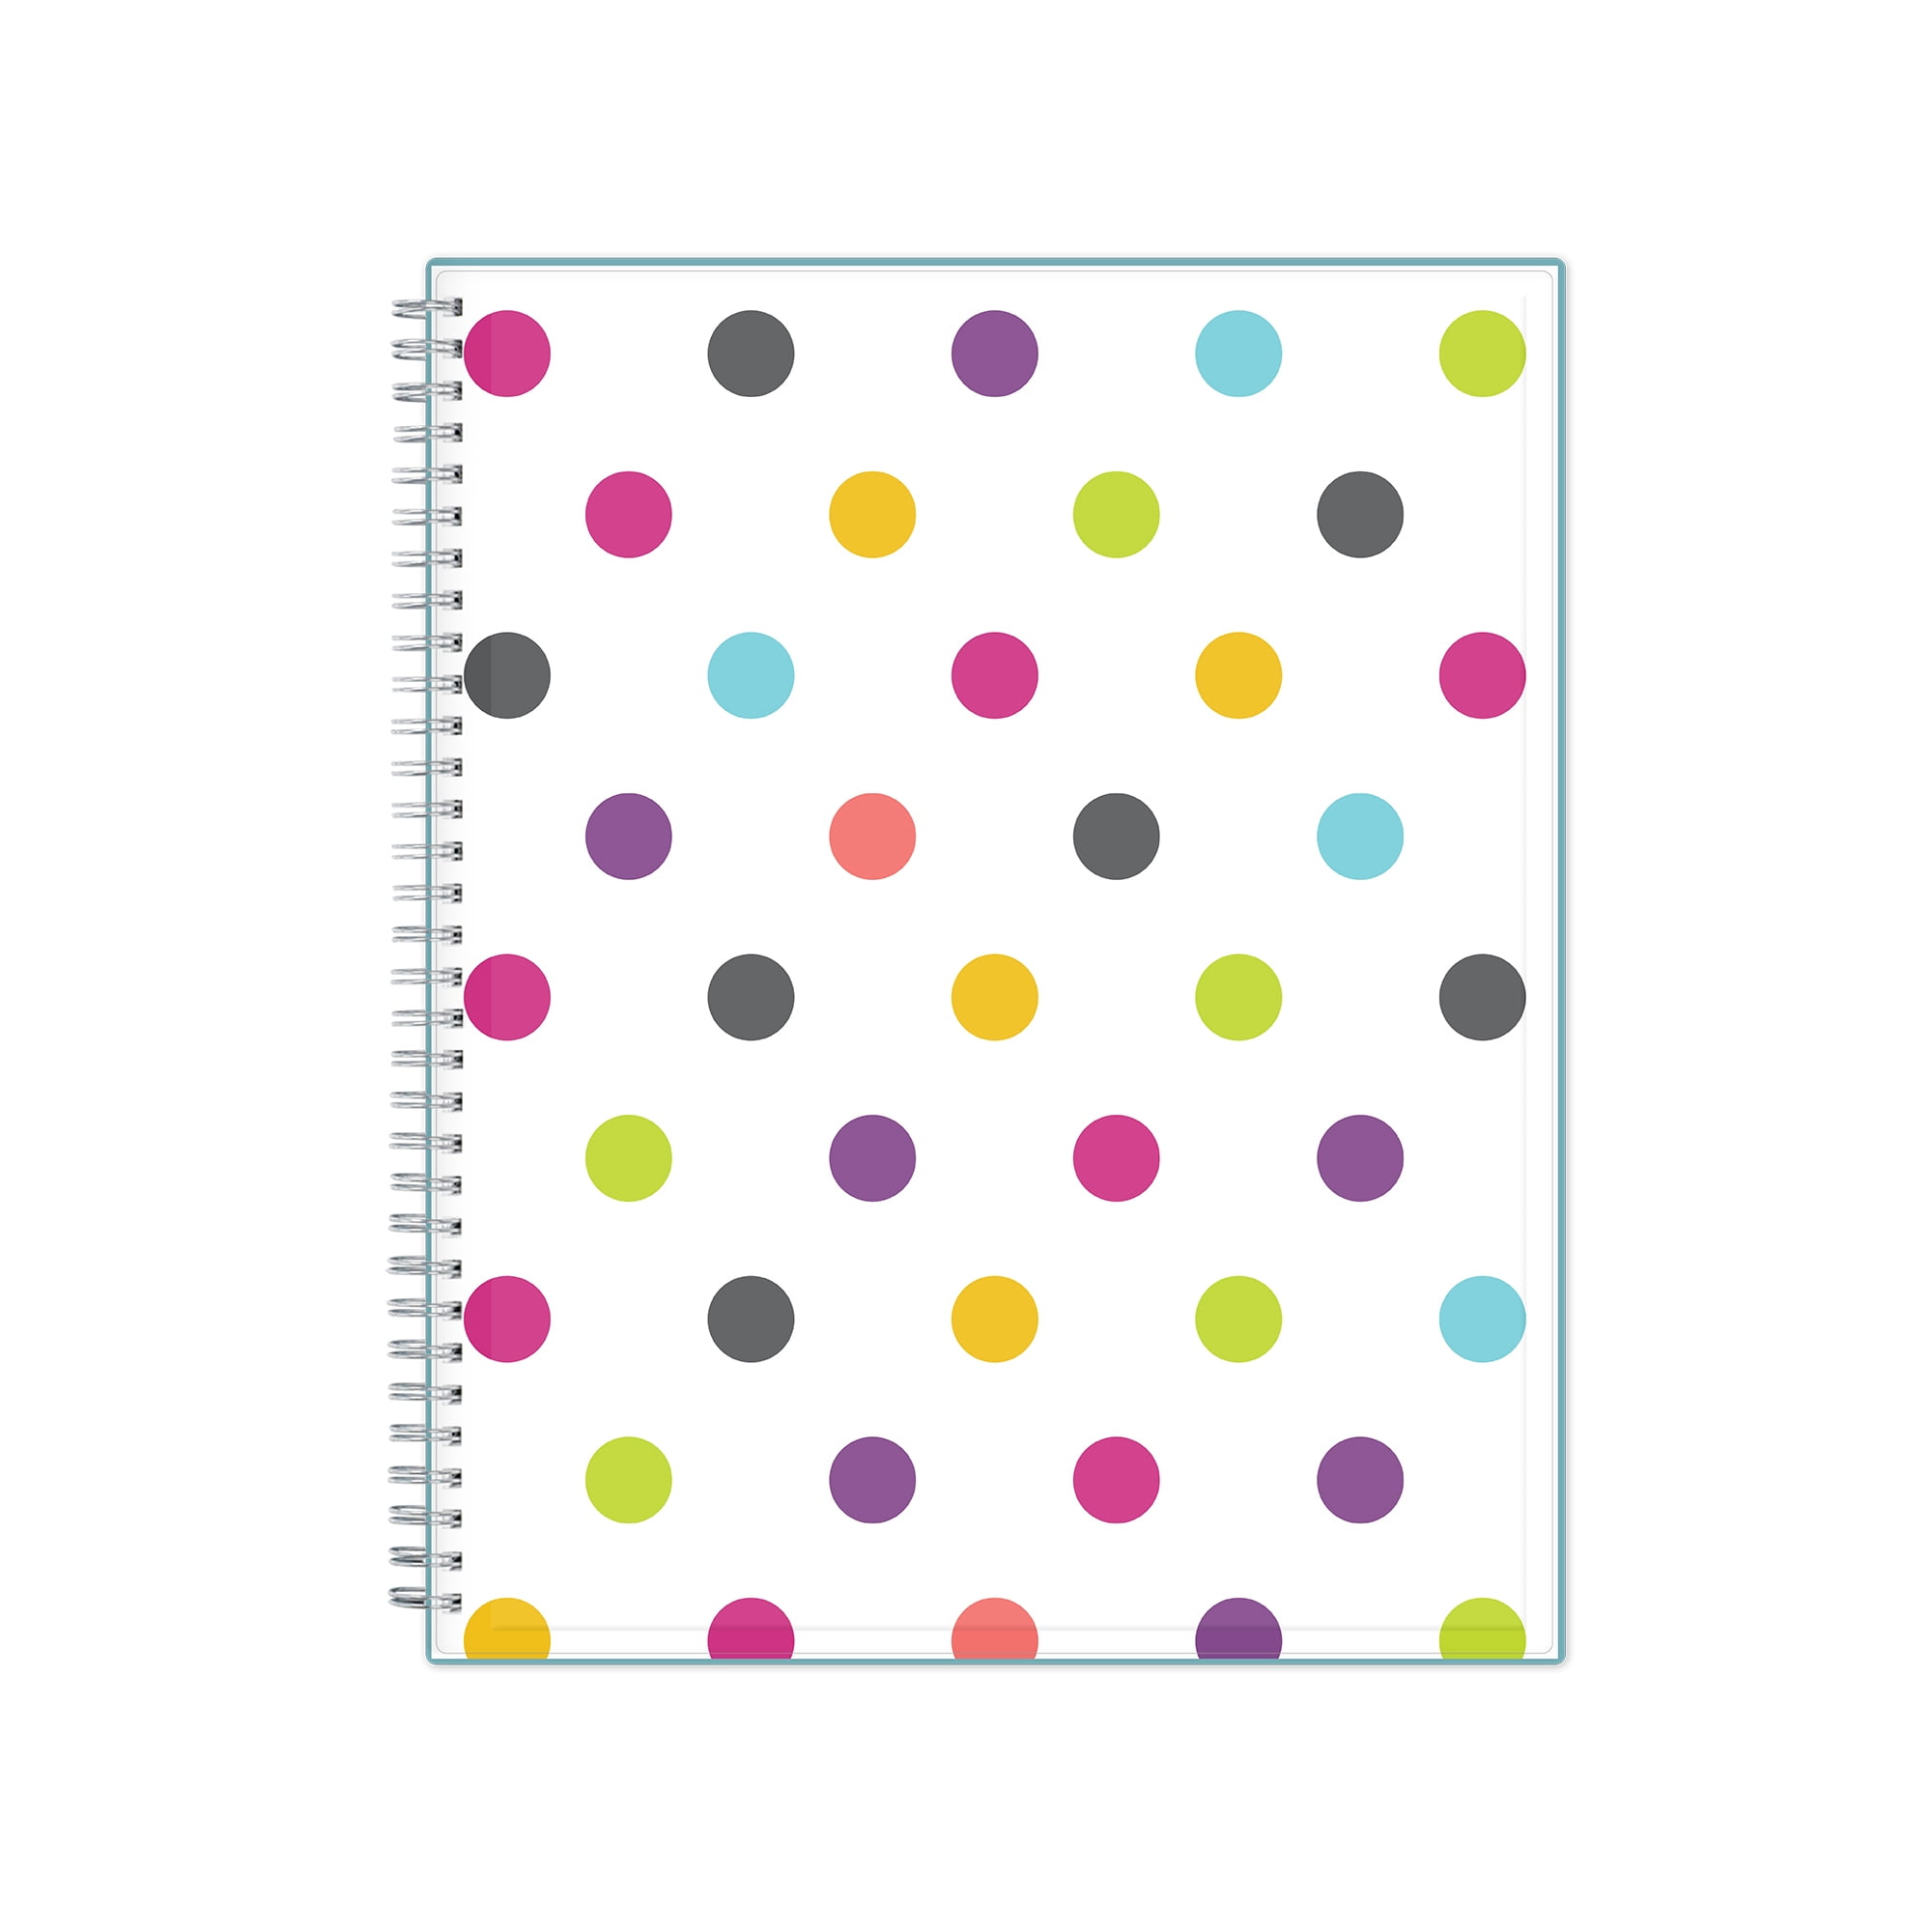 Details about   2020 2021 Planner Weekly & Monthly Academic  8" X 10" Flexible Floral Cover 